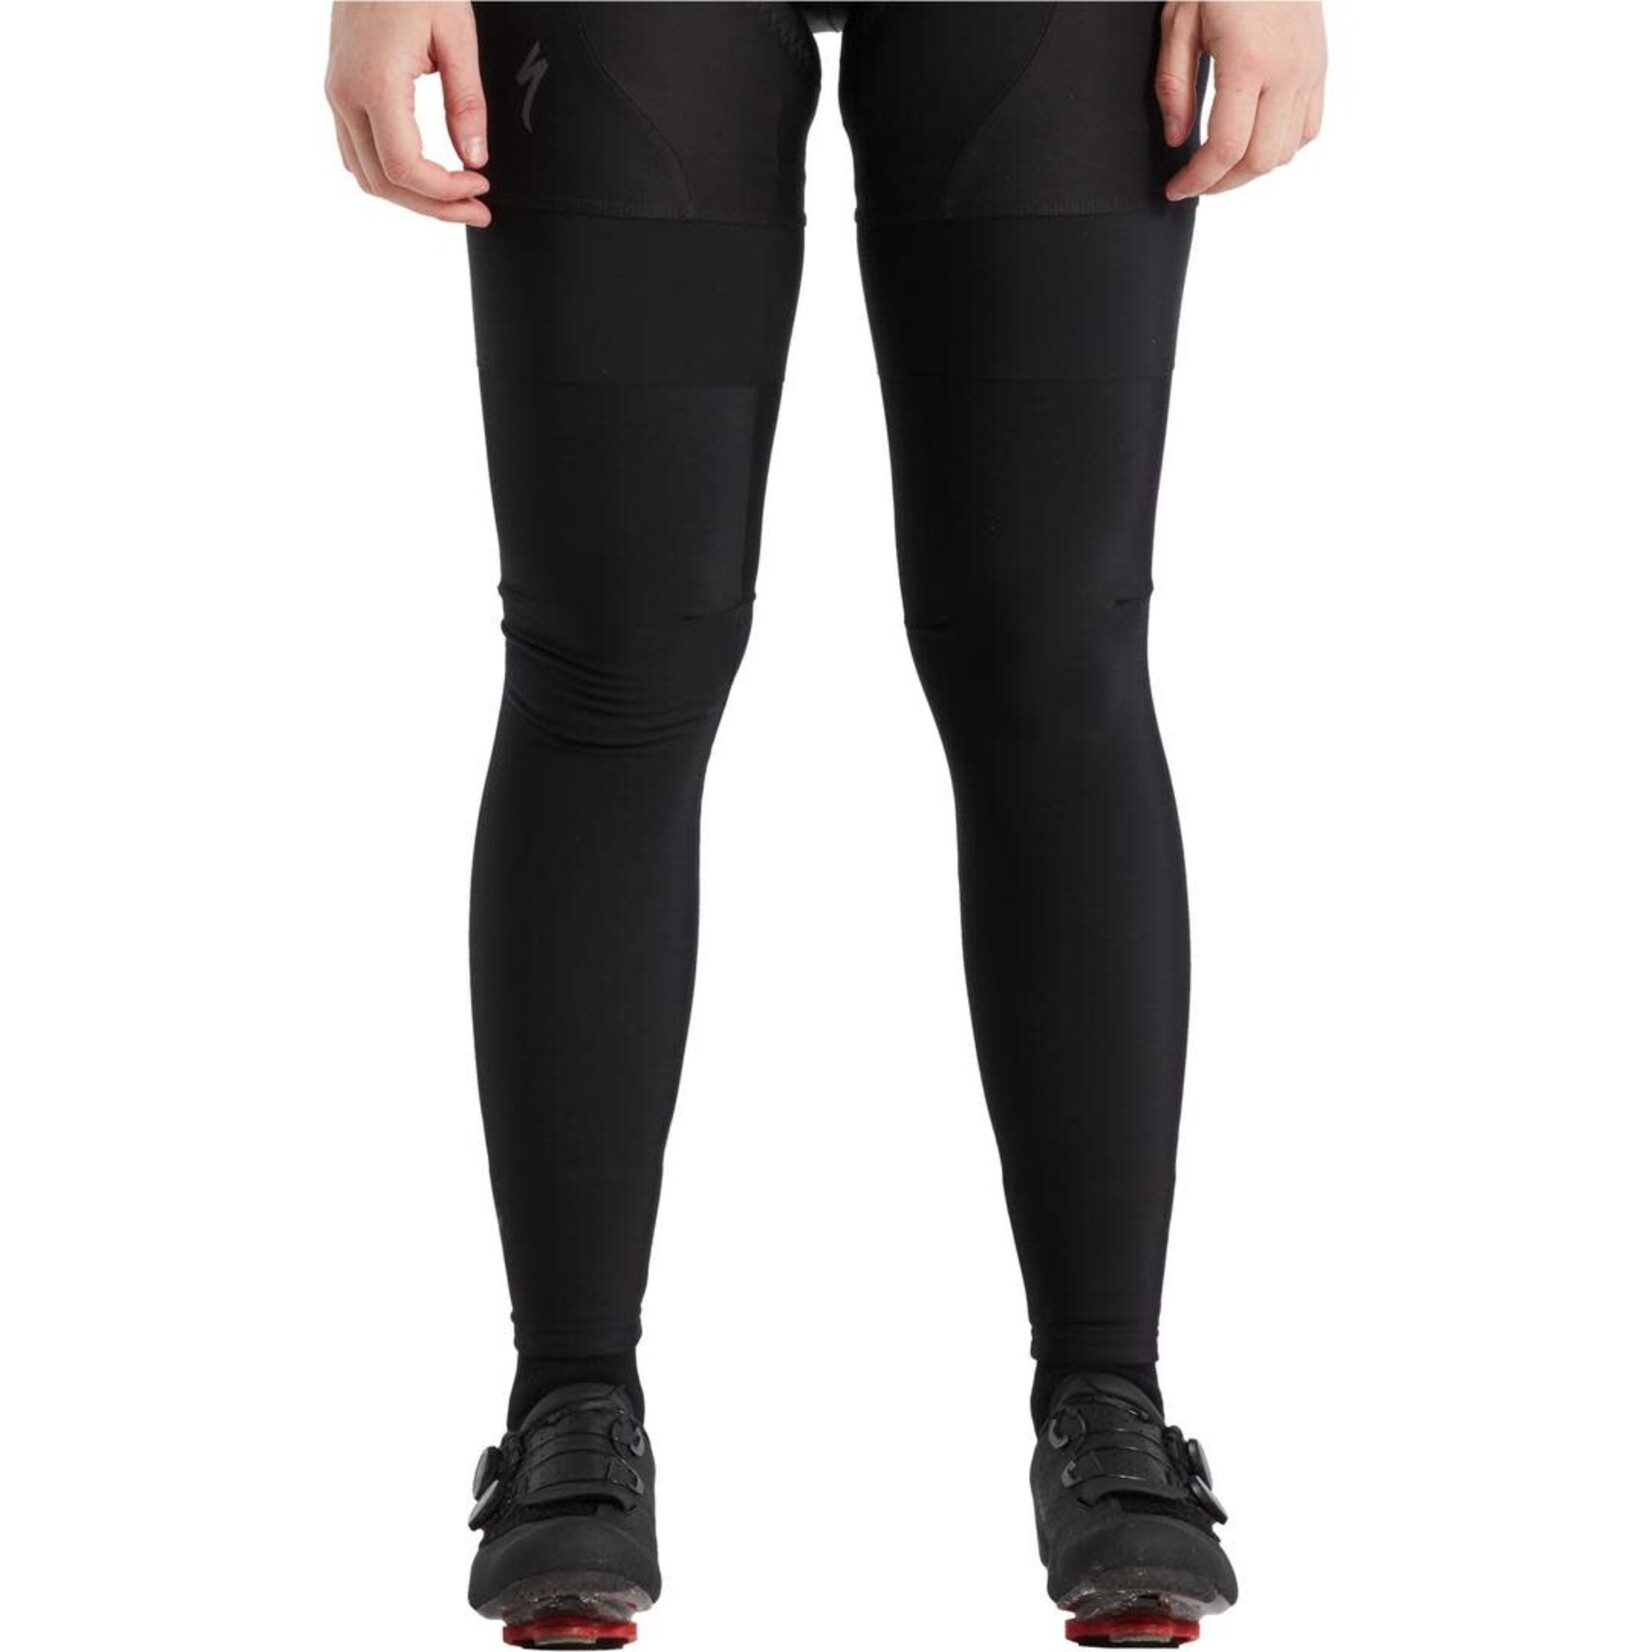 Specialized Thermal Leg Warmers in Black